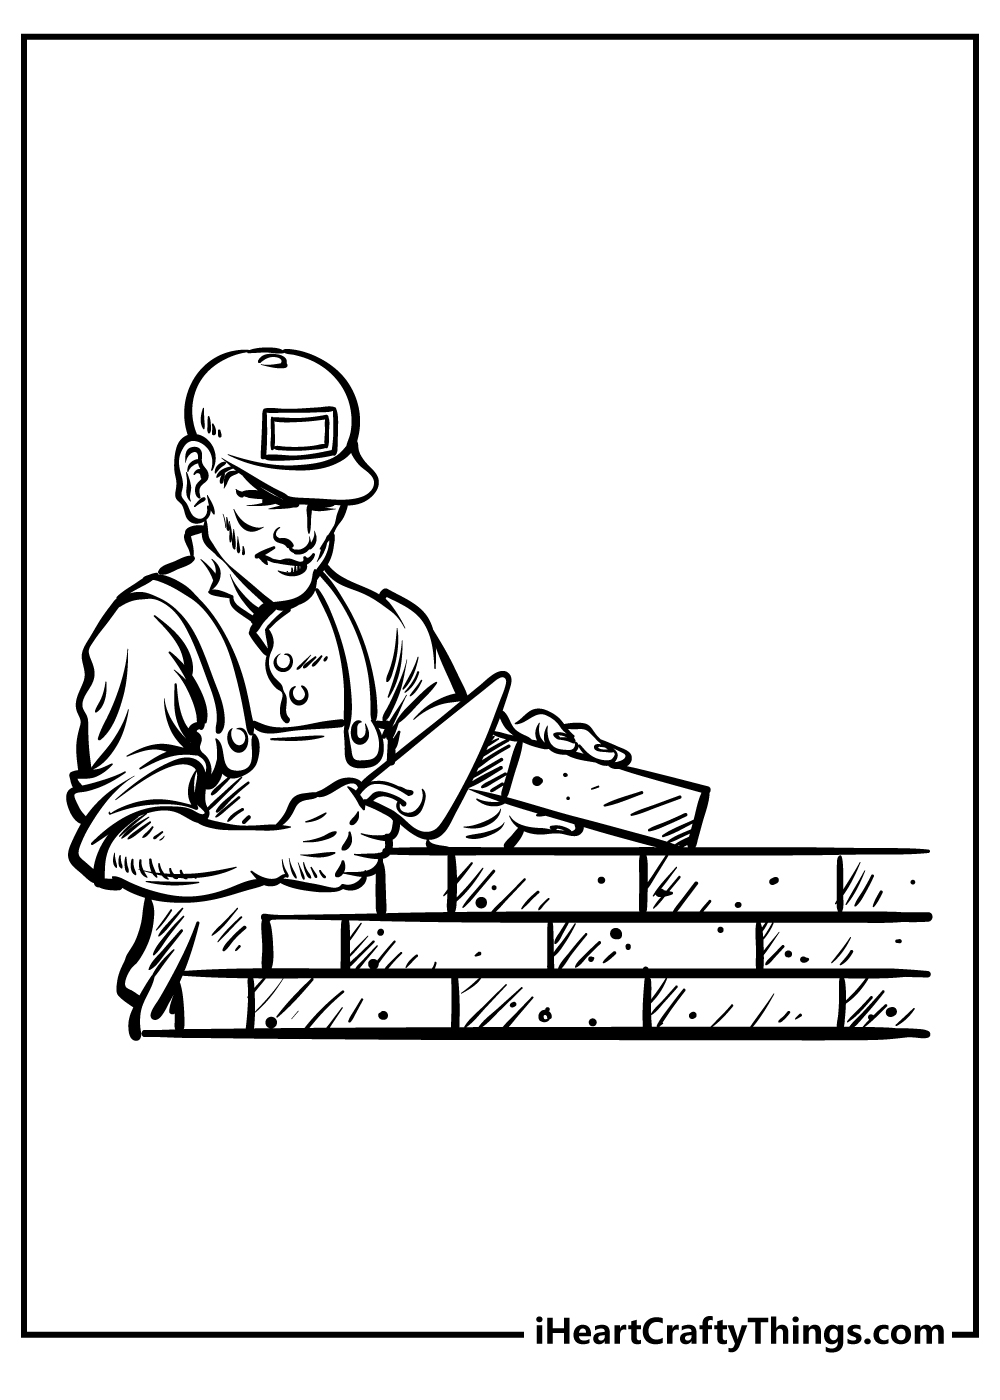 Construction Coloring Pages for kids free download